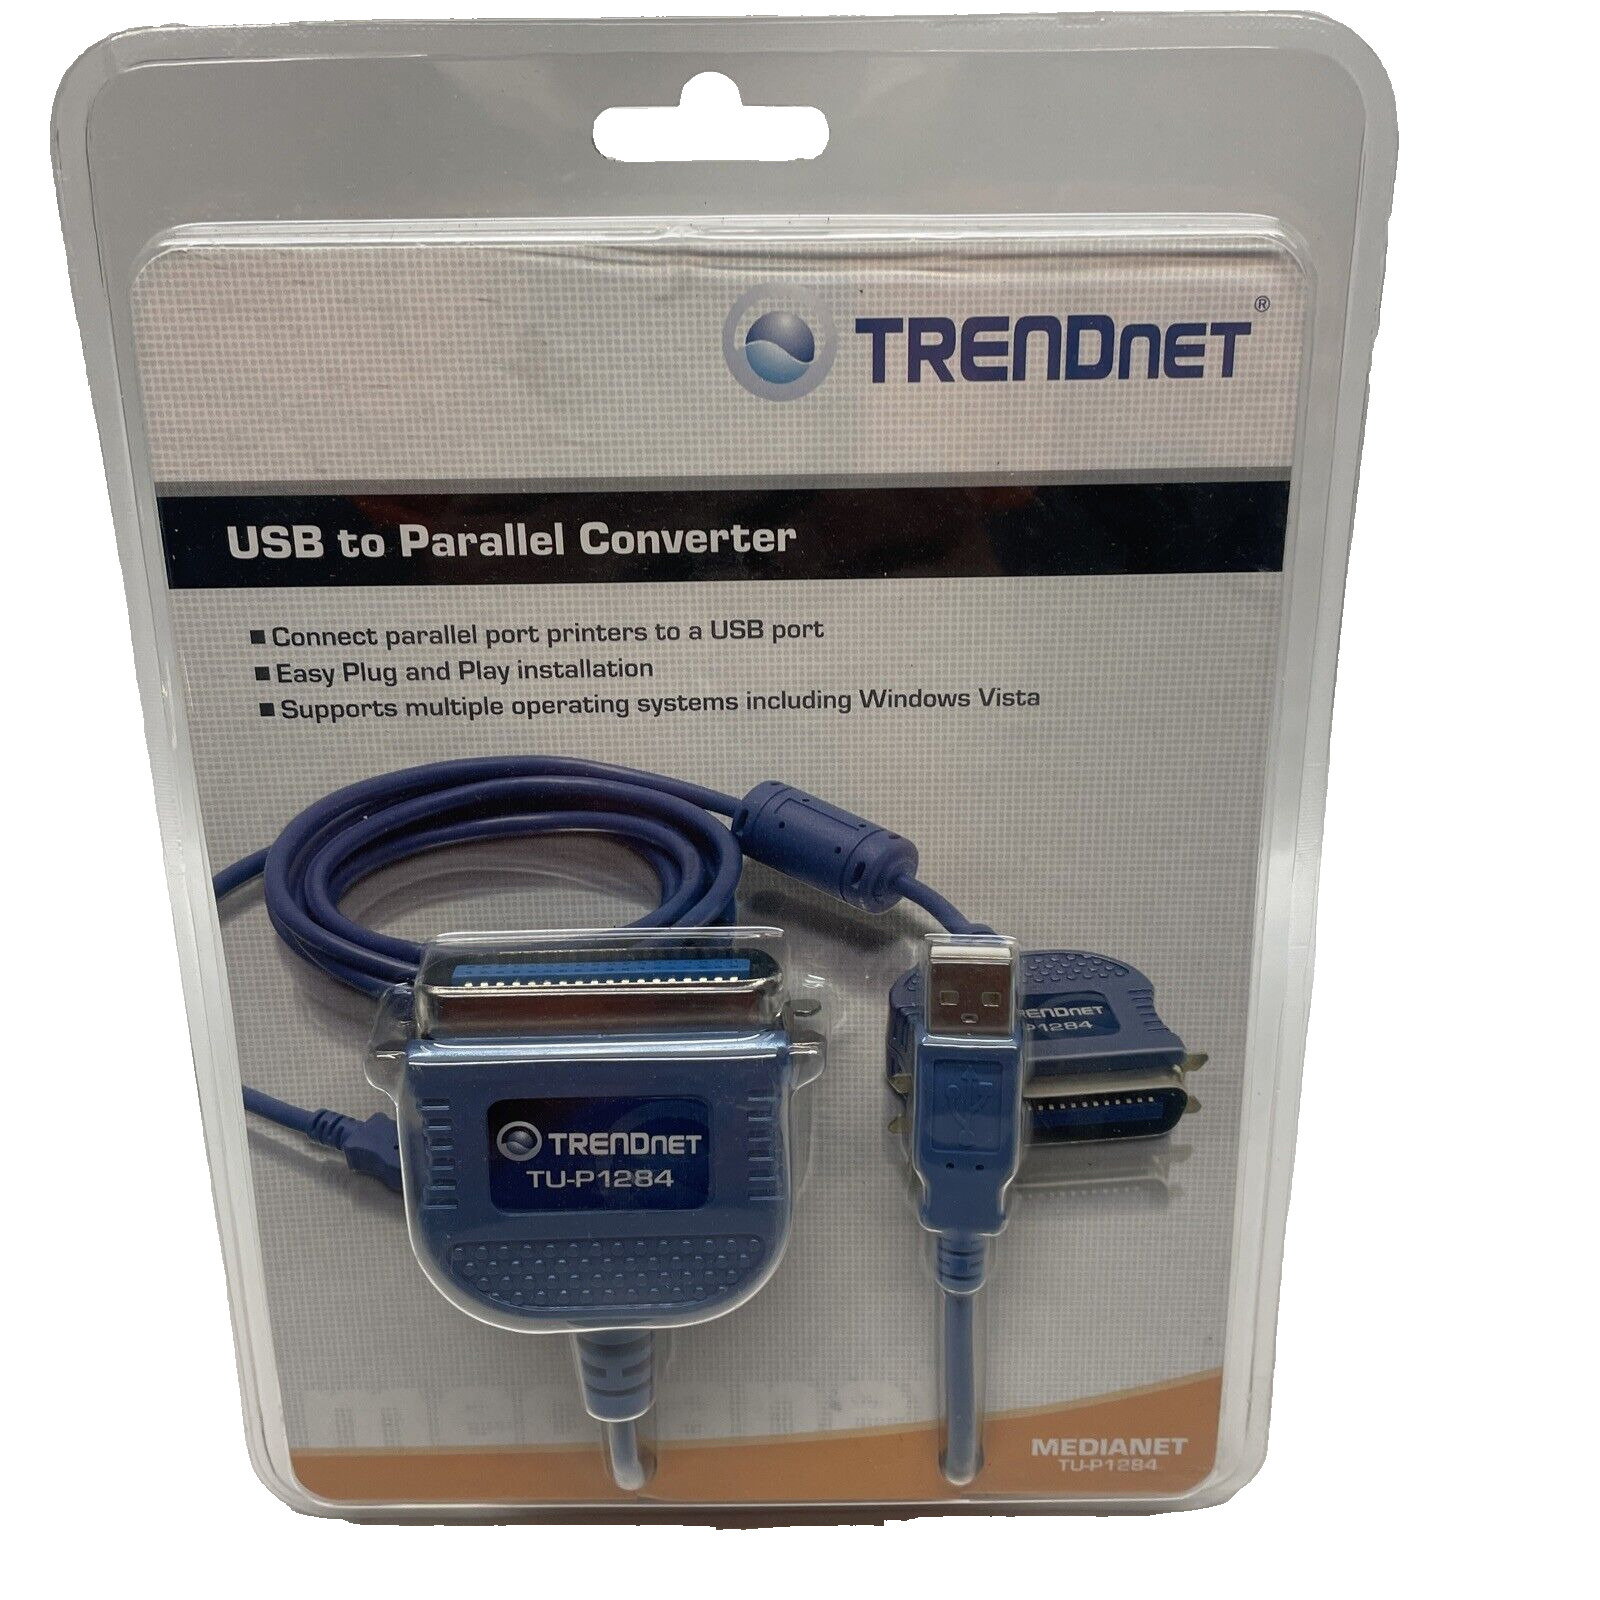 NEW TRENDnet tu-p1284 USB to Parallel cable